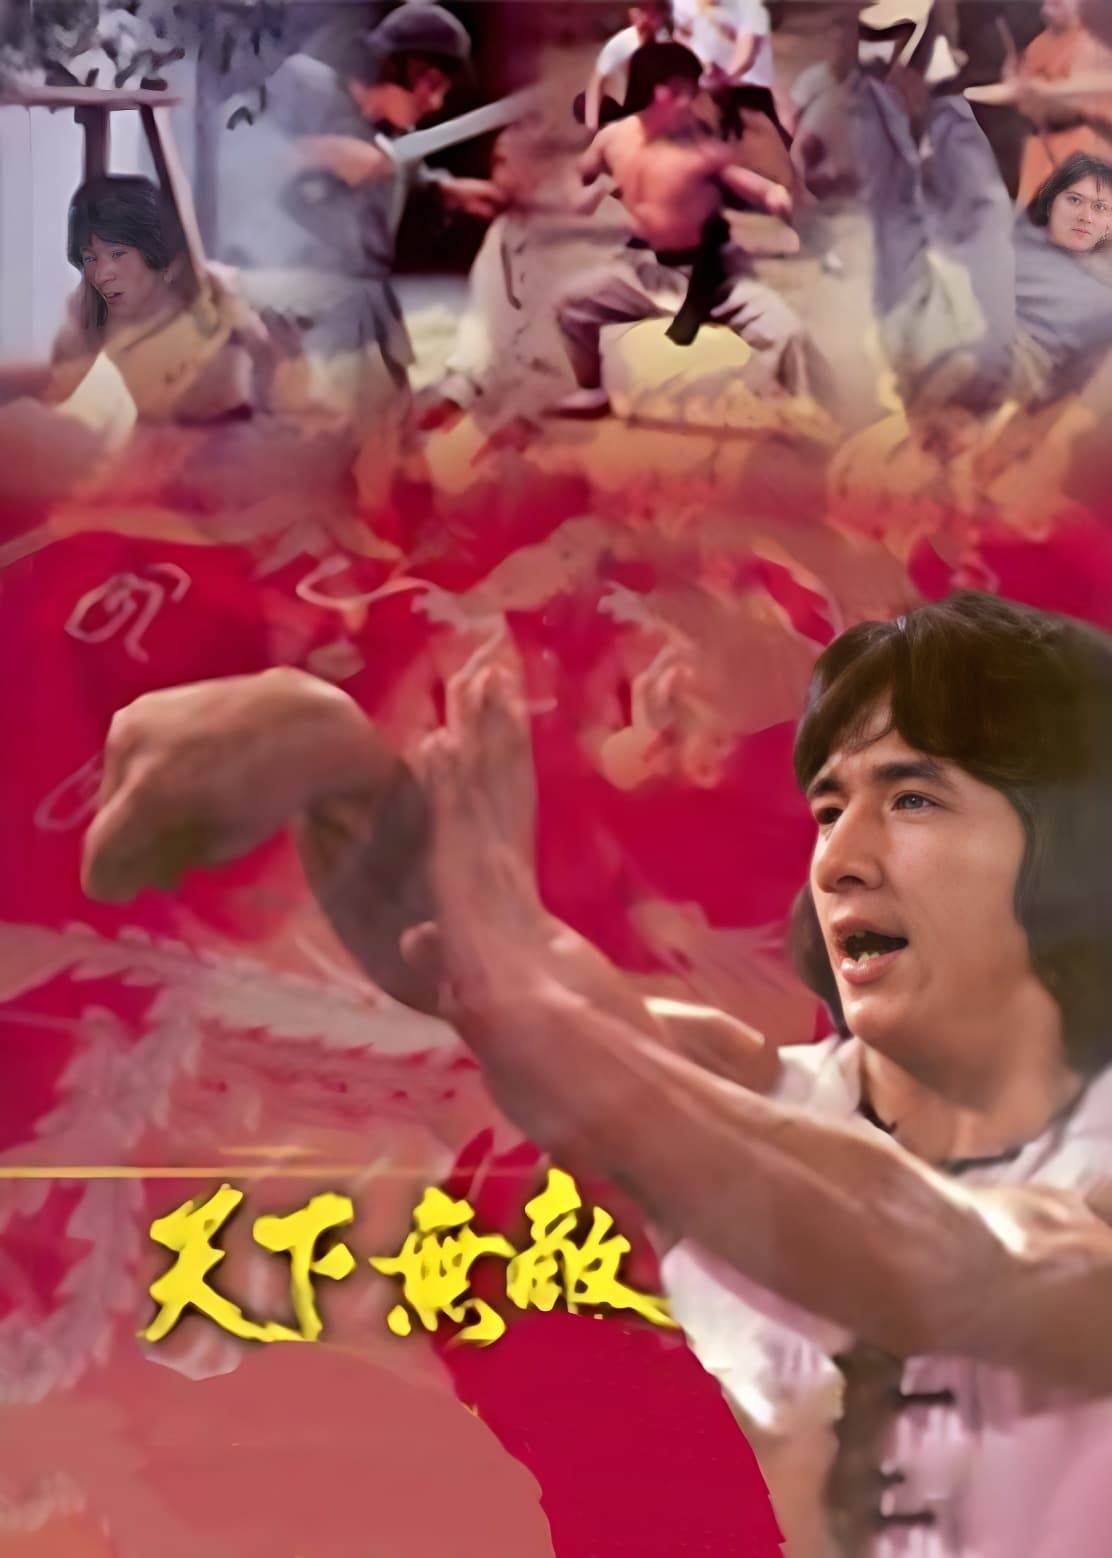 The Invincible Fighter: The Jackie Chan Story